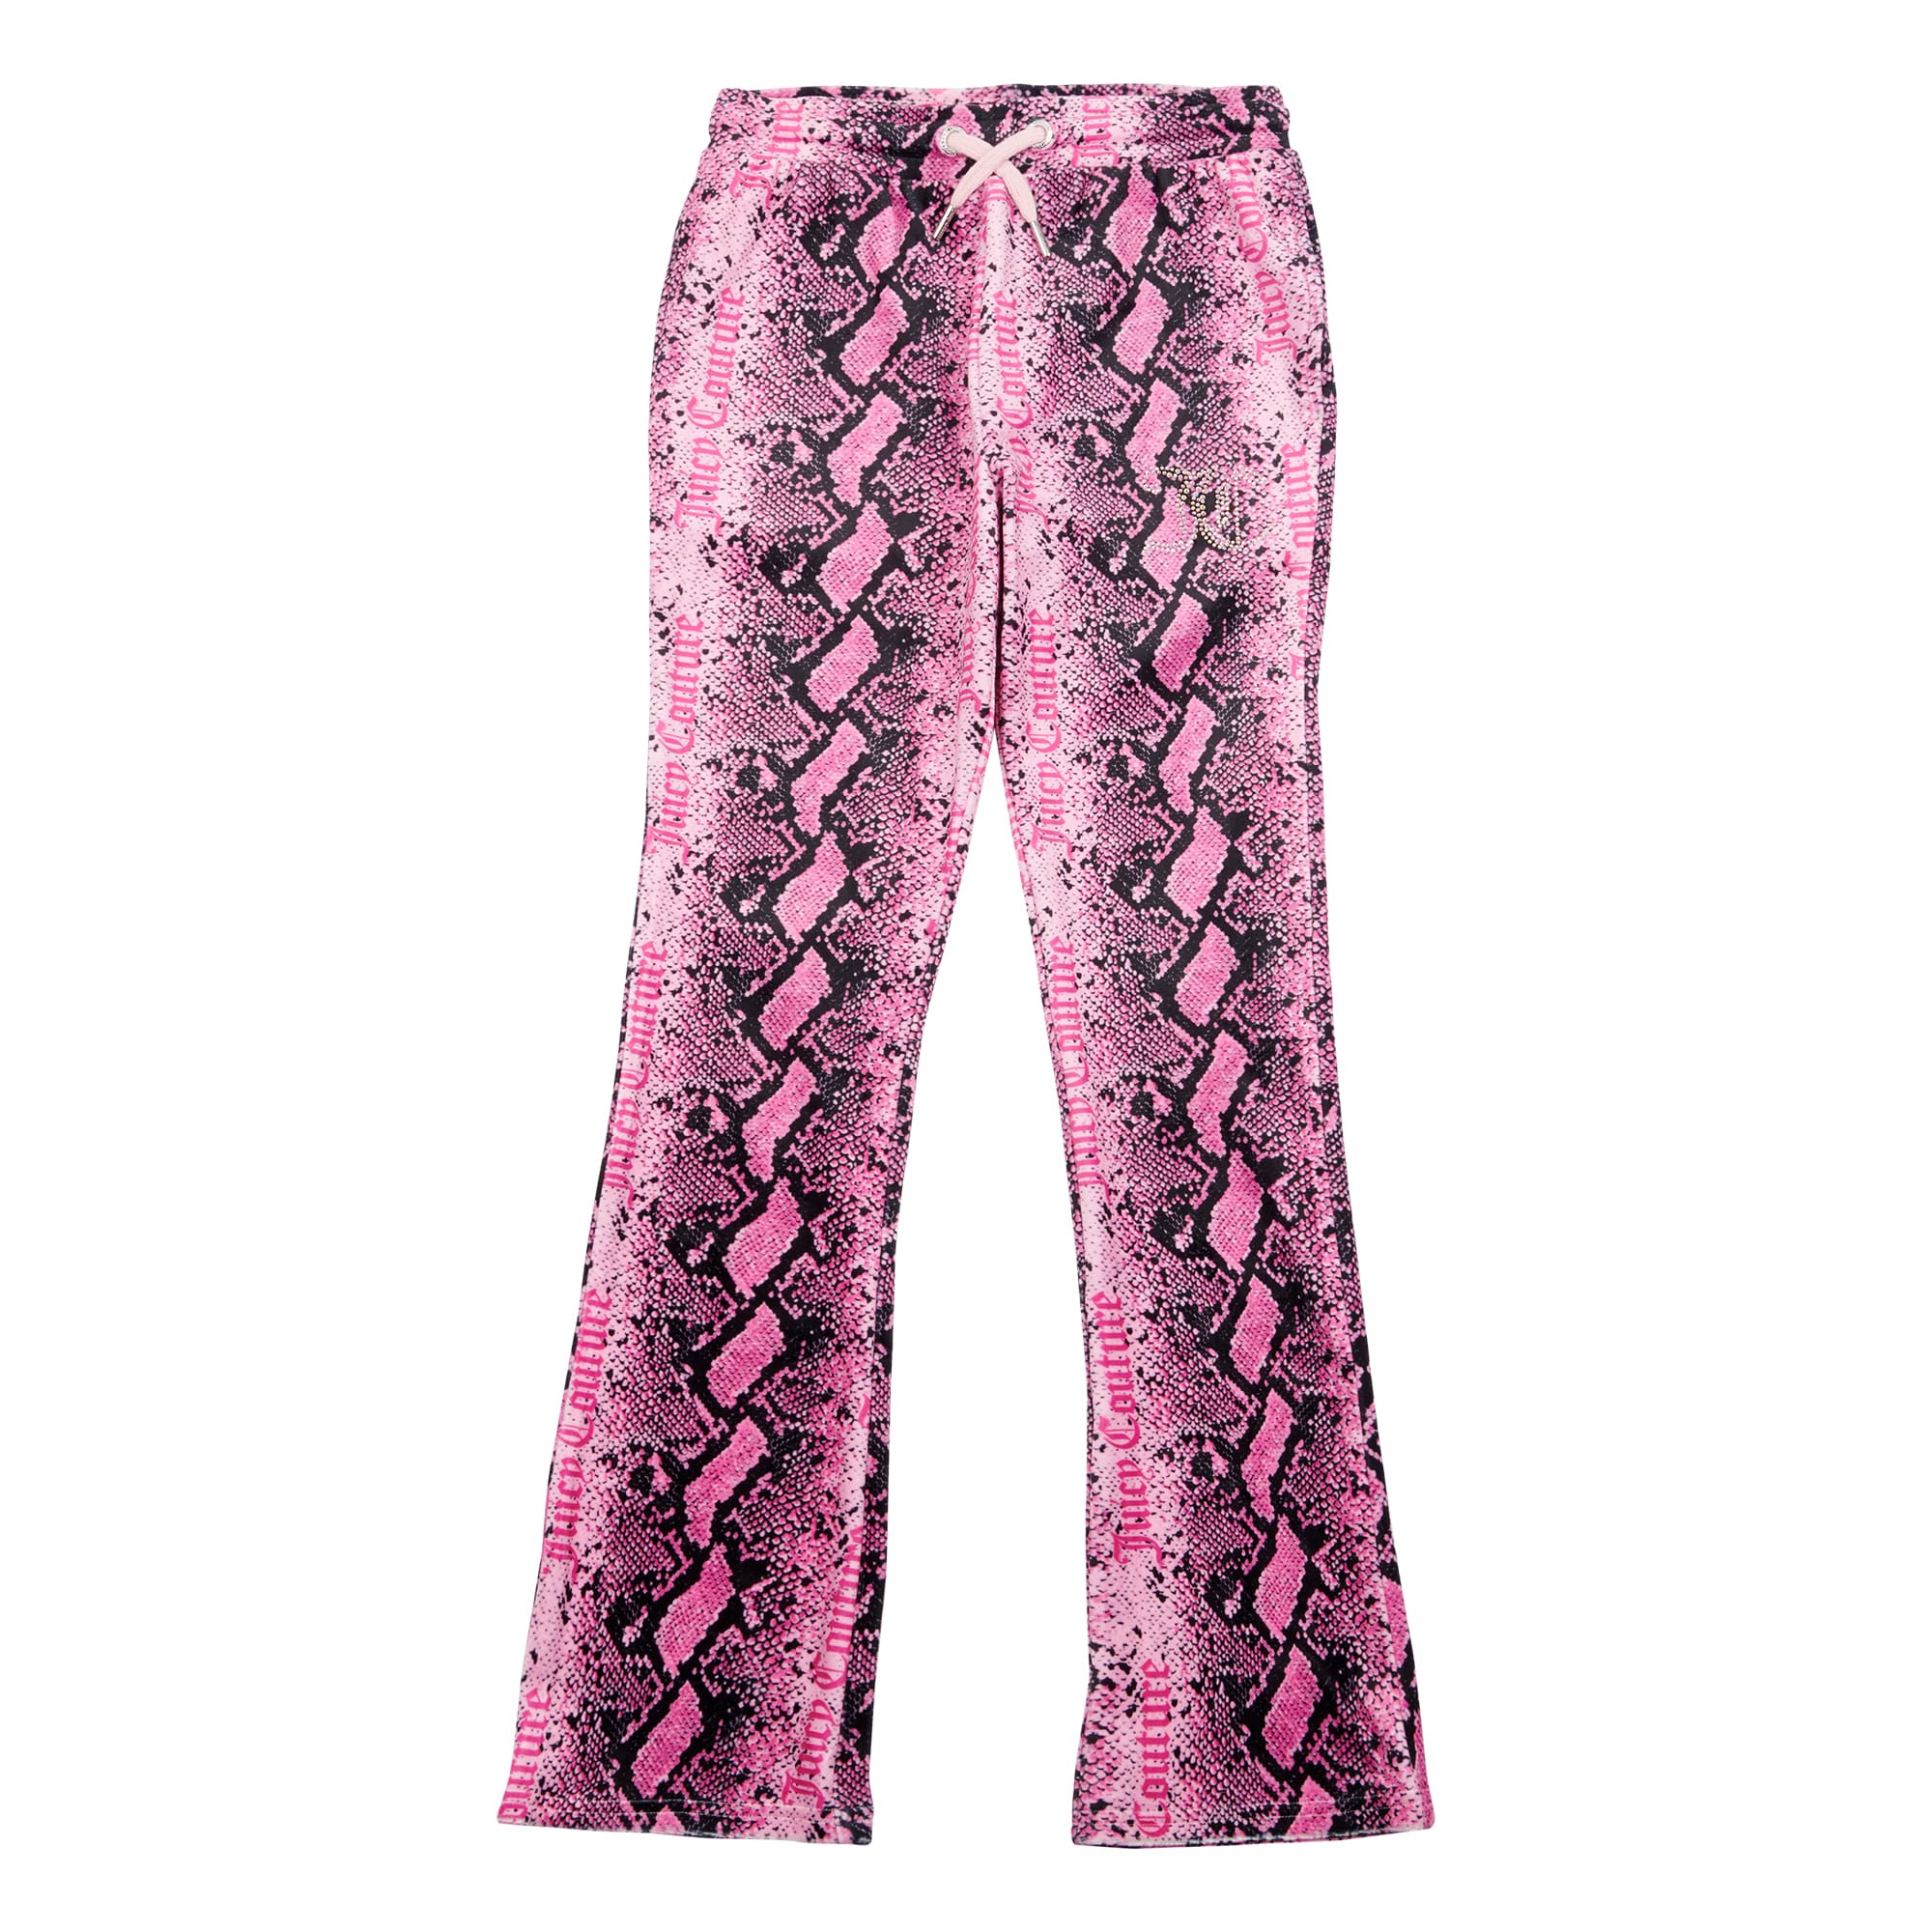 Juicy Couture pink snakeskin girls tracksuit bottoms front view